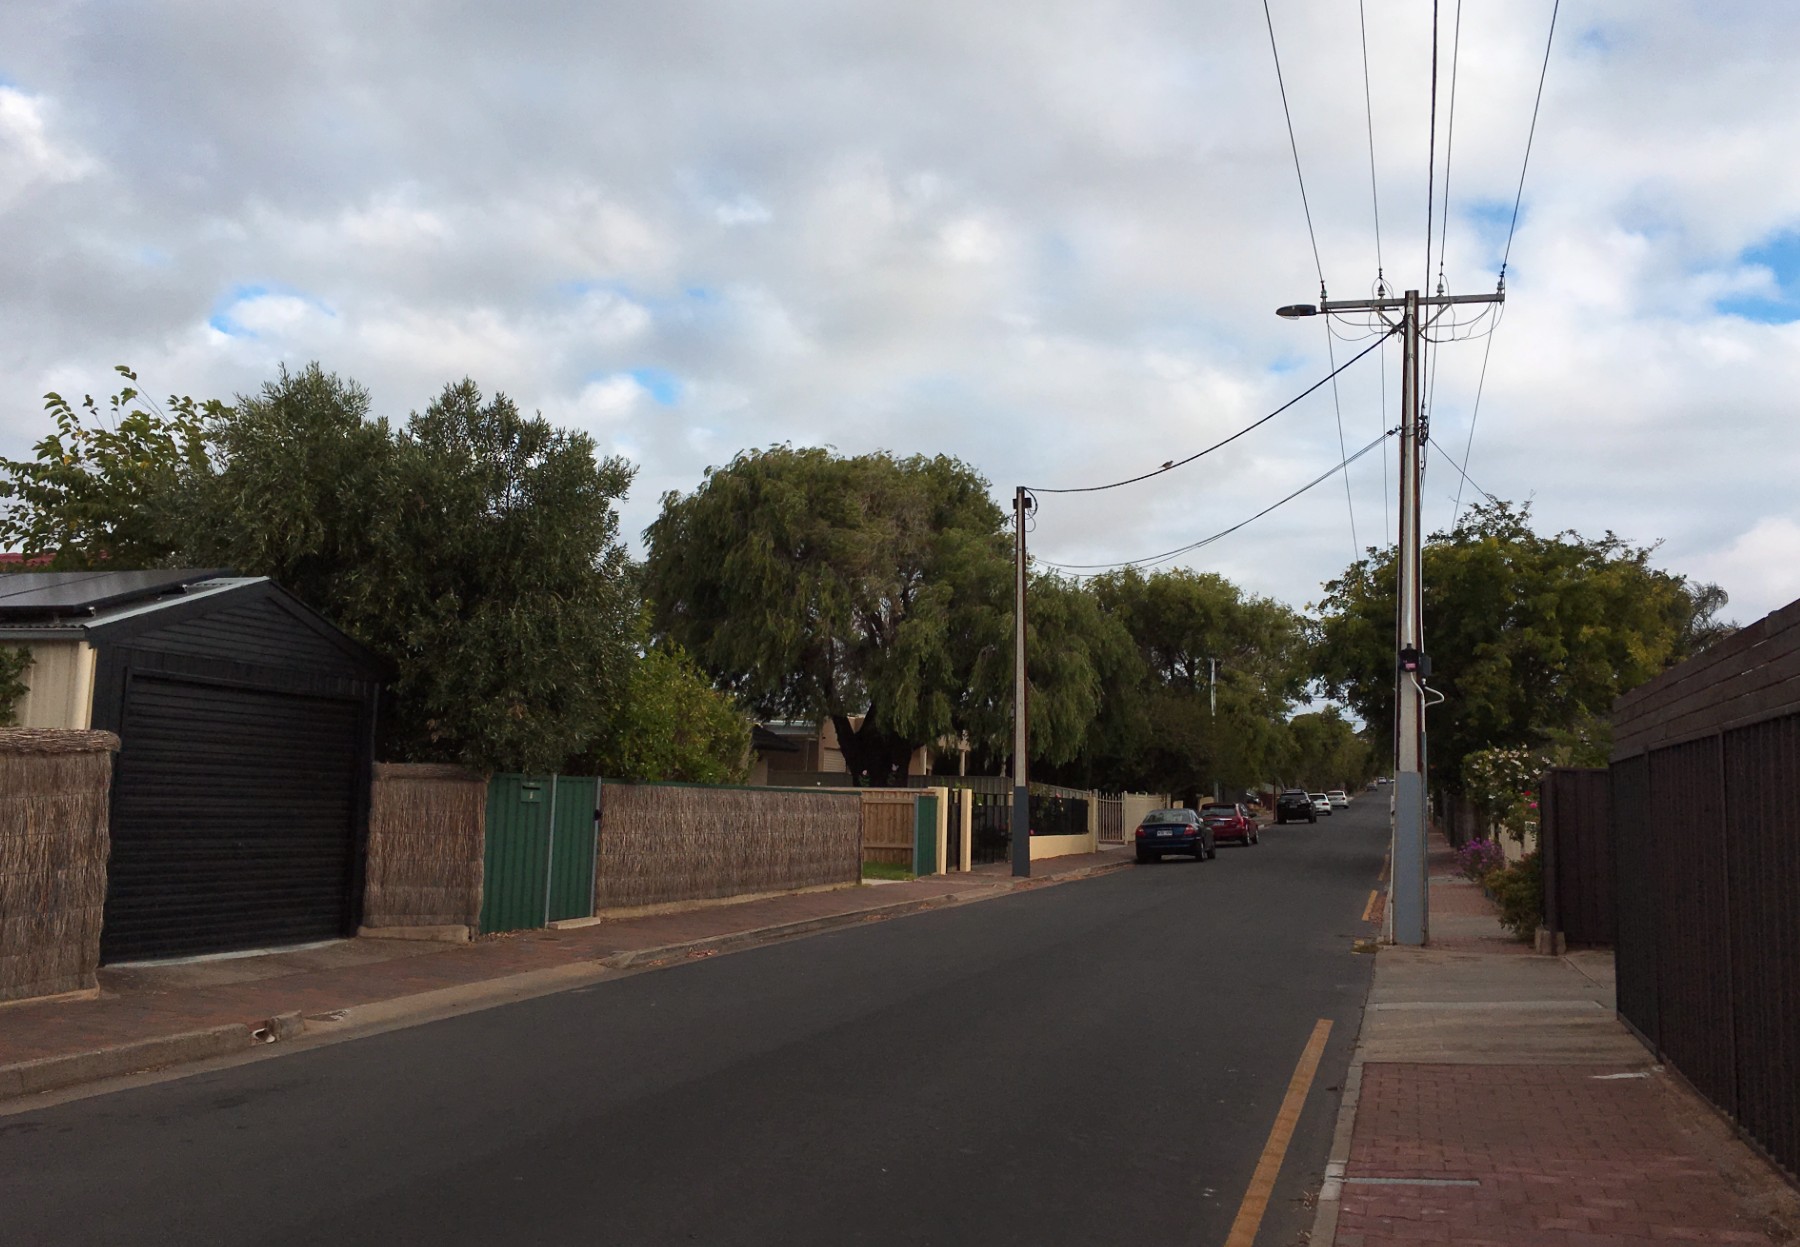 Residential street in Adelaide, with power lines overhead and brush fences on either side